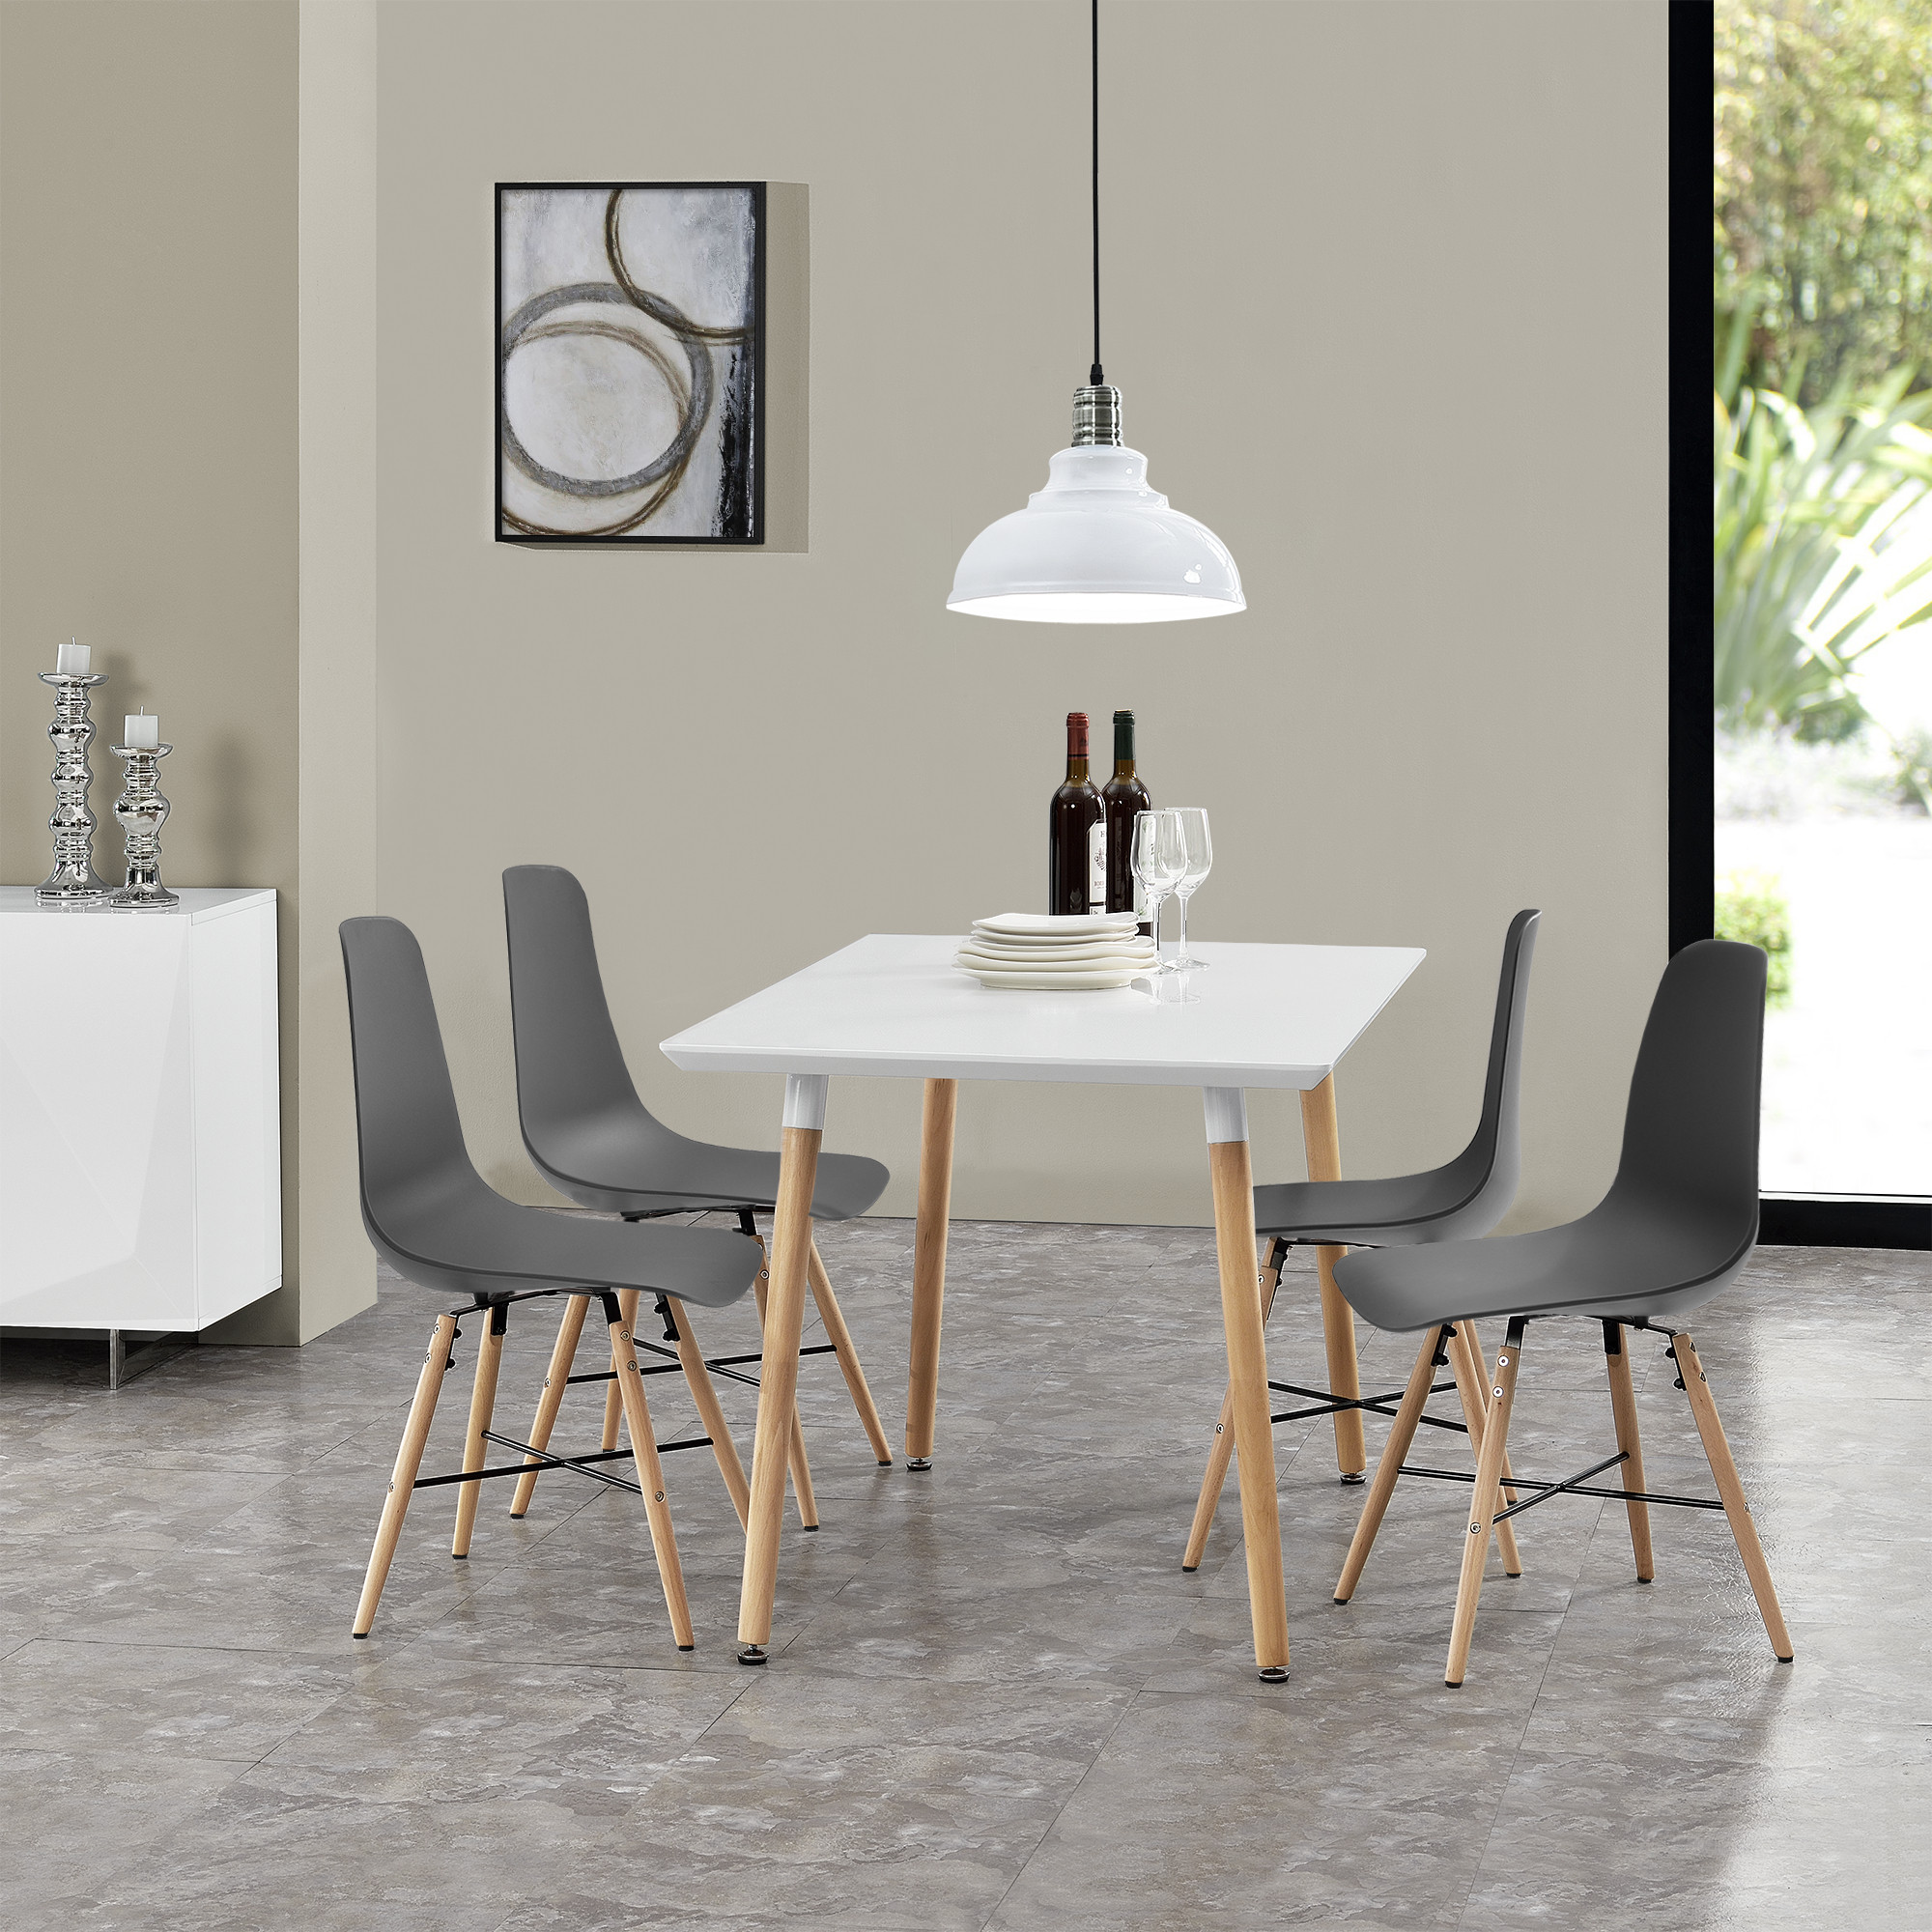 White Kitchen Chair
 Dining Table with 4 chairs White Grey 120x70cm Kitchen